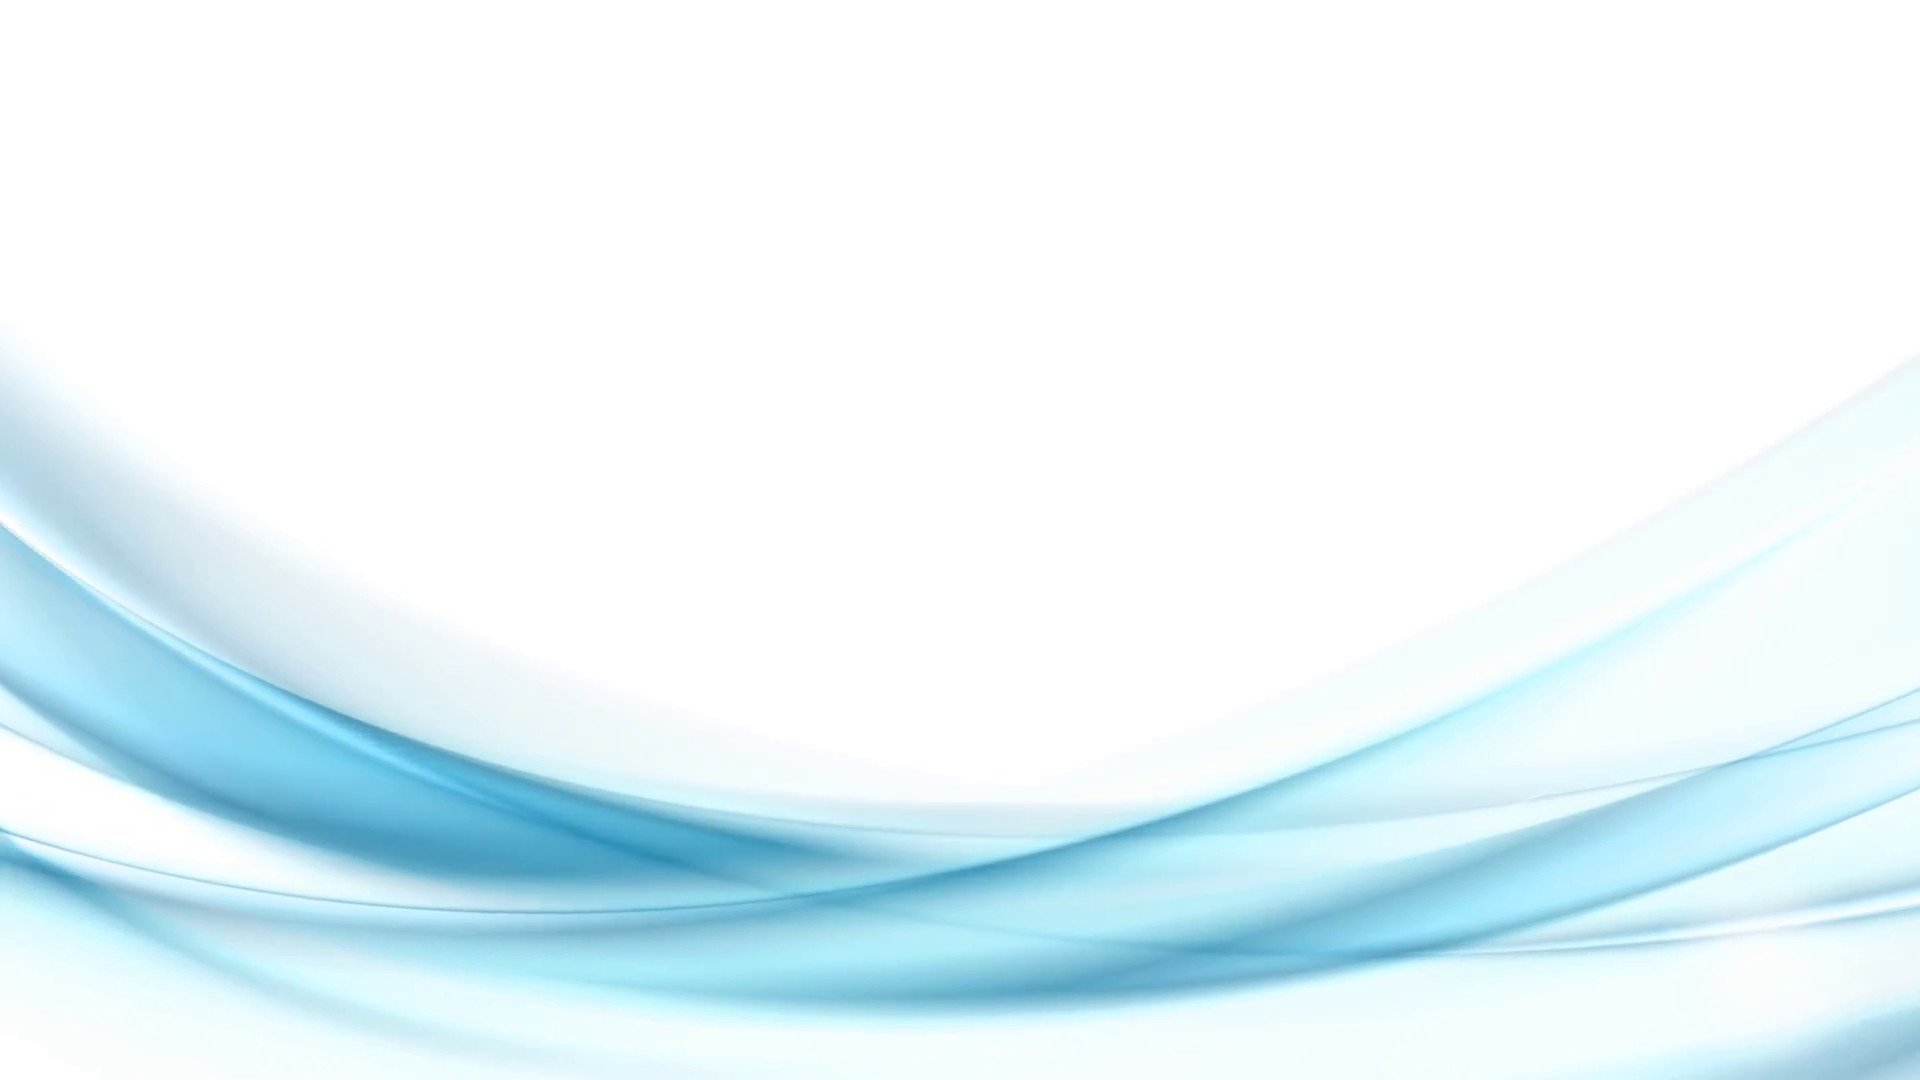 1920x1080 Blue moving flowing abstract waves on white background. Blurred smooth  seamless loop design. Video